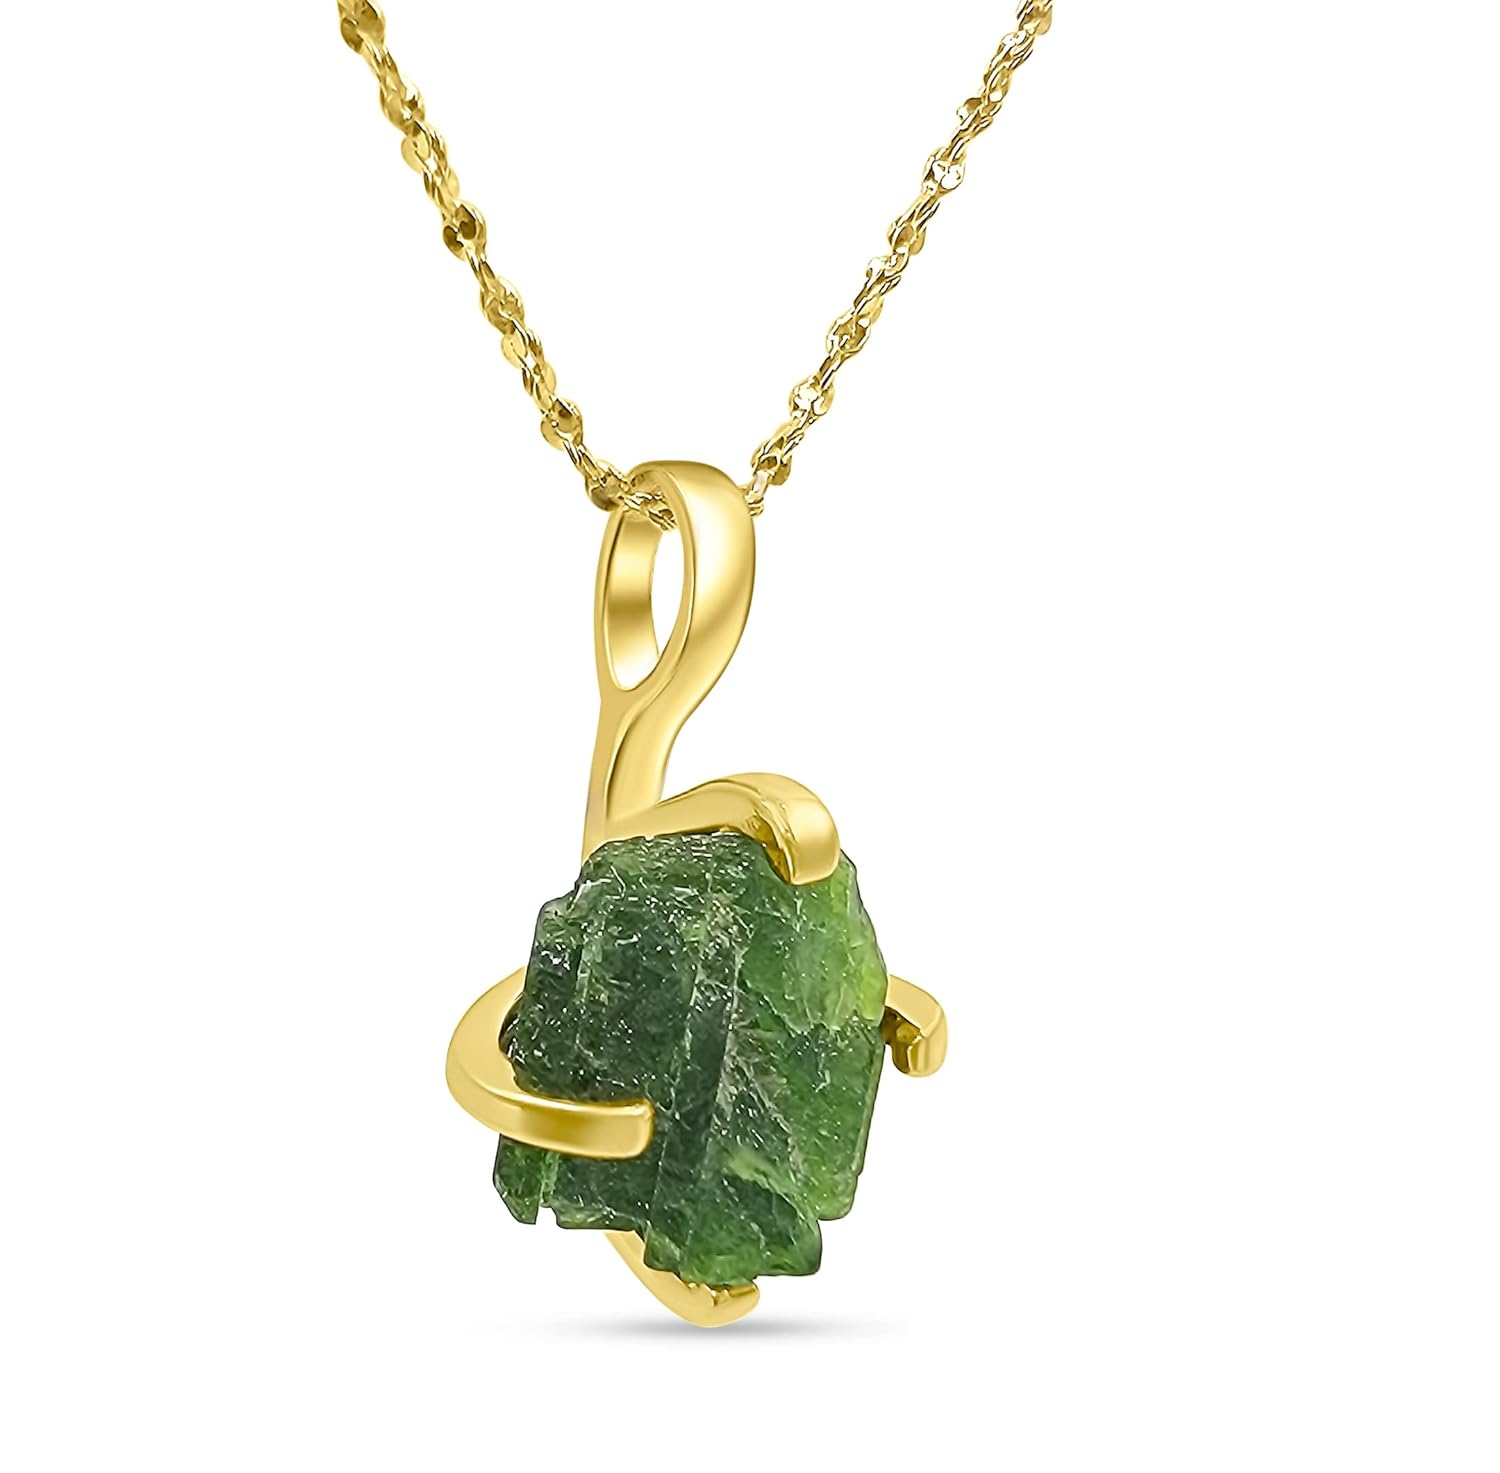 Natural raw green tourmaline chain pendant necklace with yellow gold over 925 sterling silver, birthstone dainty solitaire gift for her, uniquelan jewelry (green-tourmaline)